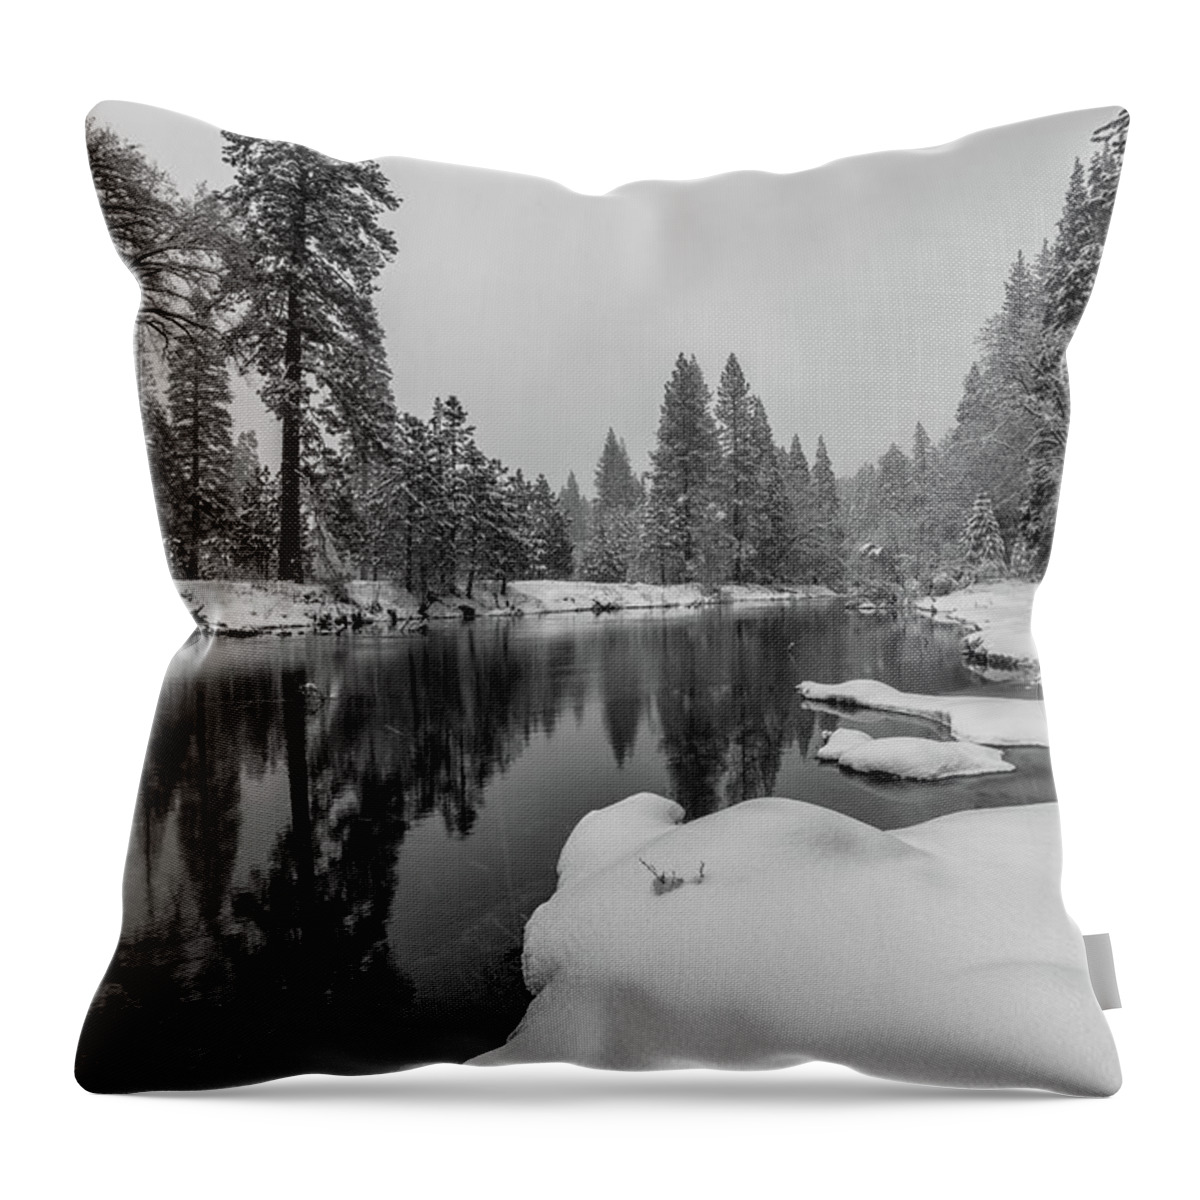 Landscape Throw Pillow featuring the photograph Snow Shower Along Merced Riverbank by Jonathan Nguyen